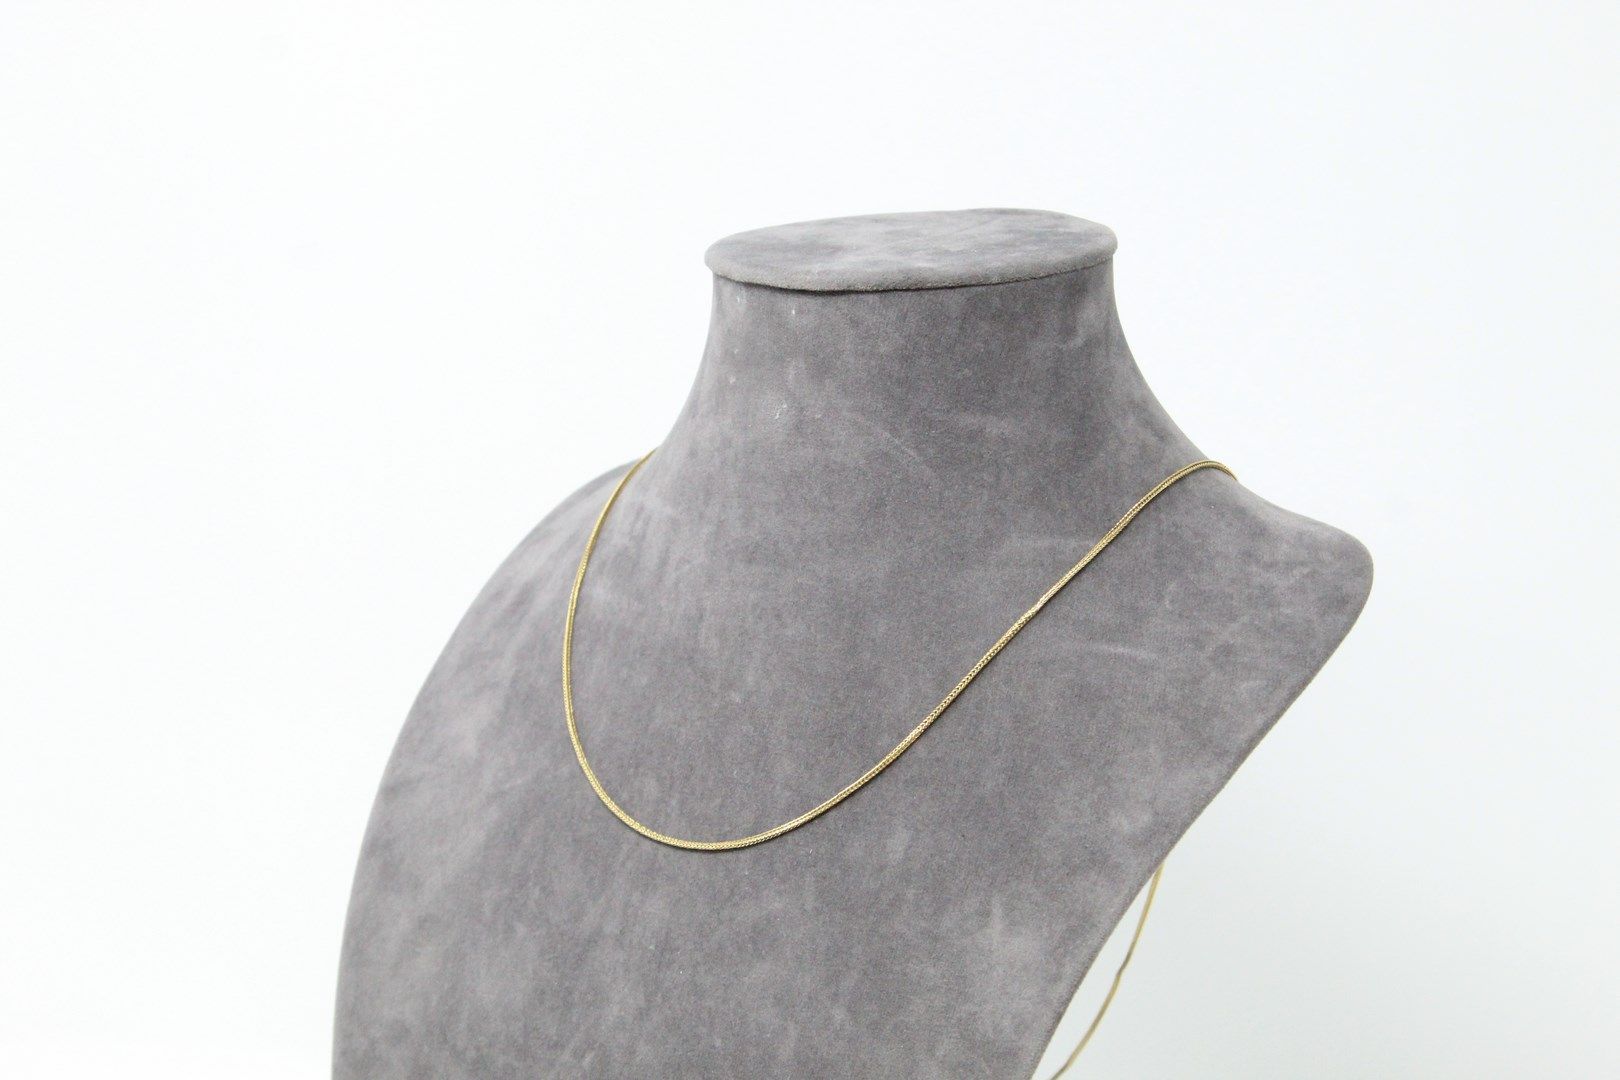 Null 18k (750) yellow gold chain

Length of neck : 73 cm. - Weight : 7.64 g.